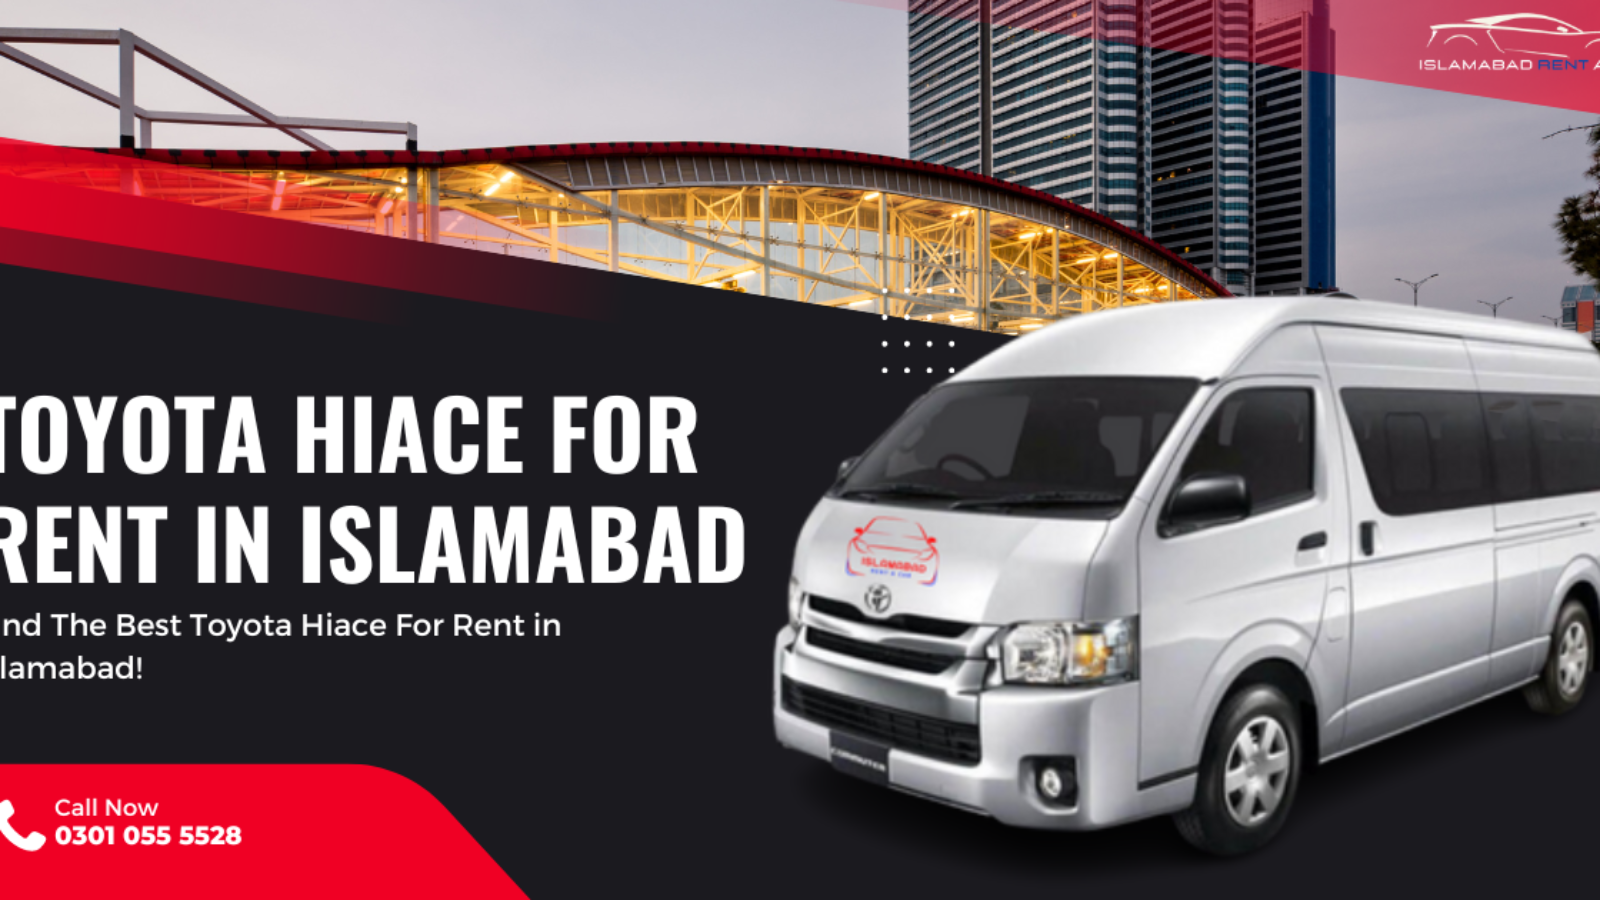 Hiace For Rent In Islamabad